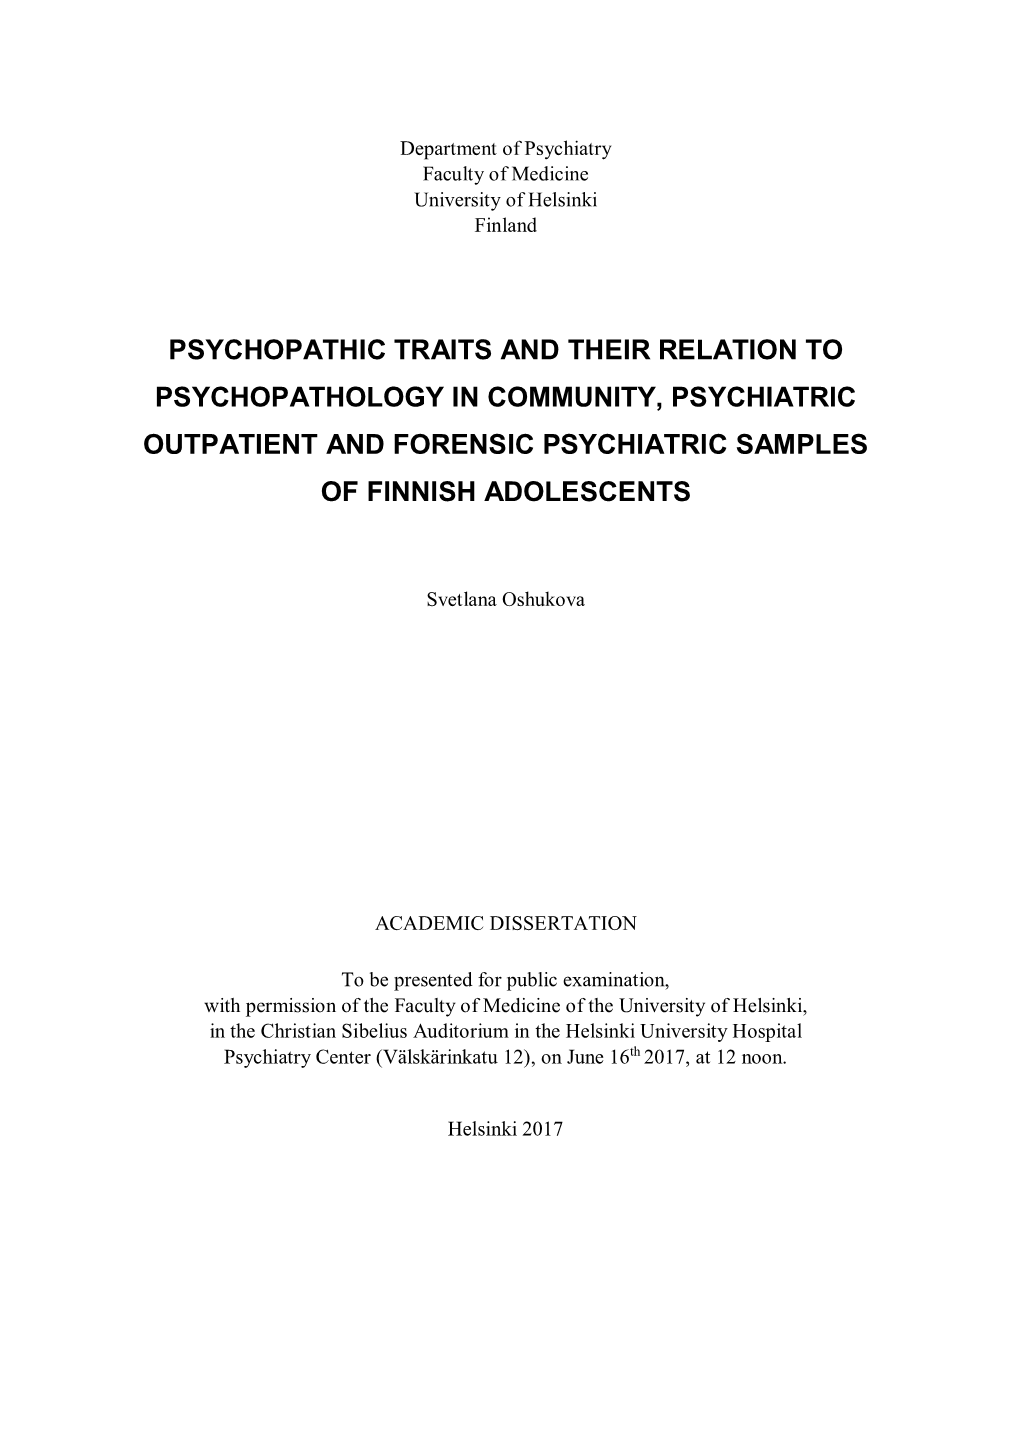 Psychopathic Traits and Their Relation to Psychopathology in Community, Psychiatric Outpatient and Forensic Psychiatric Samples of Finnish Adolescents